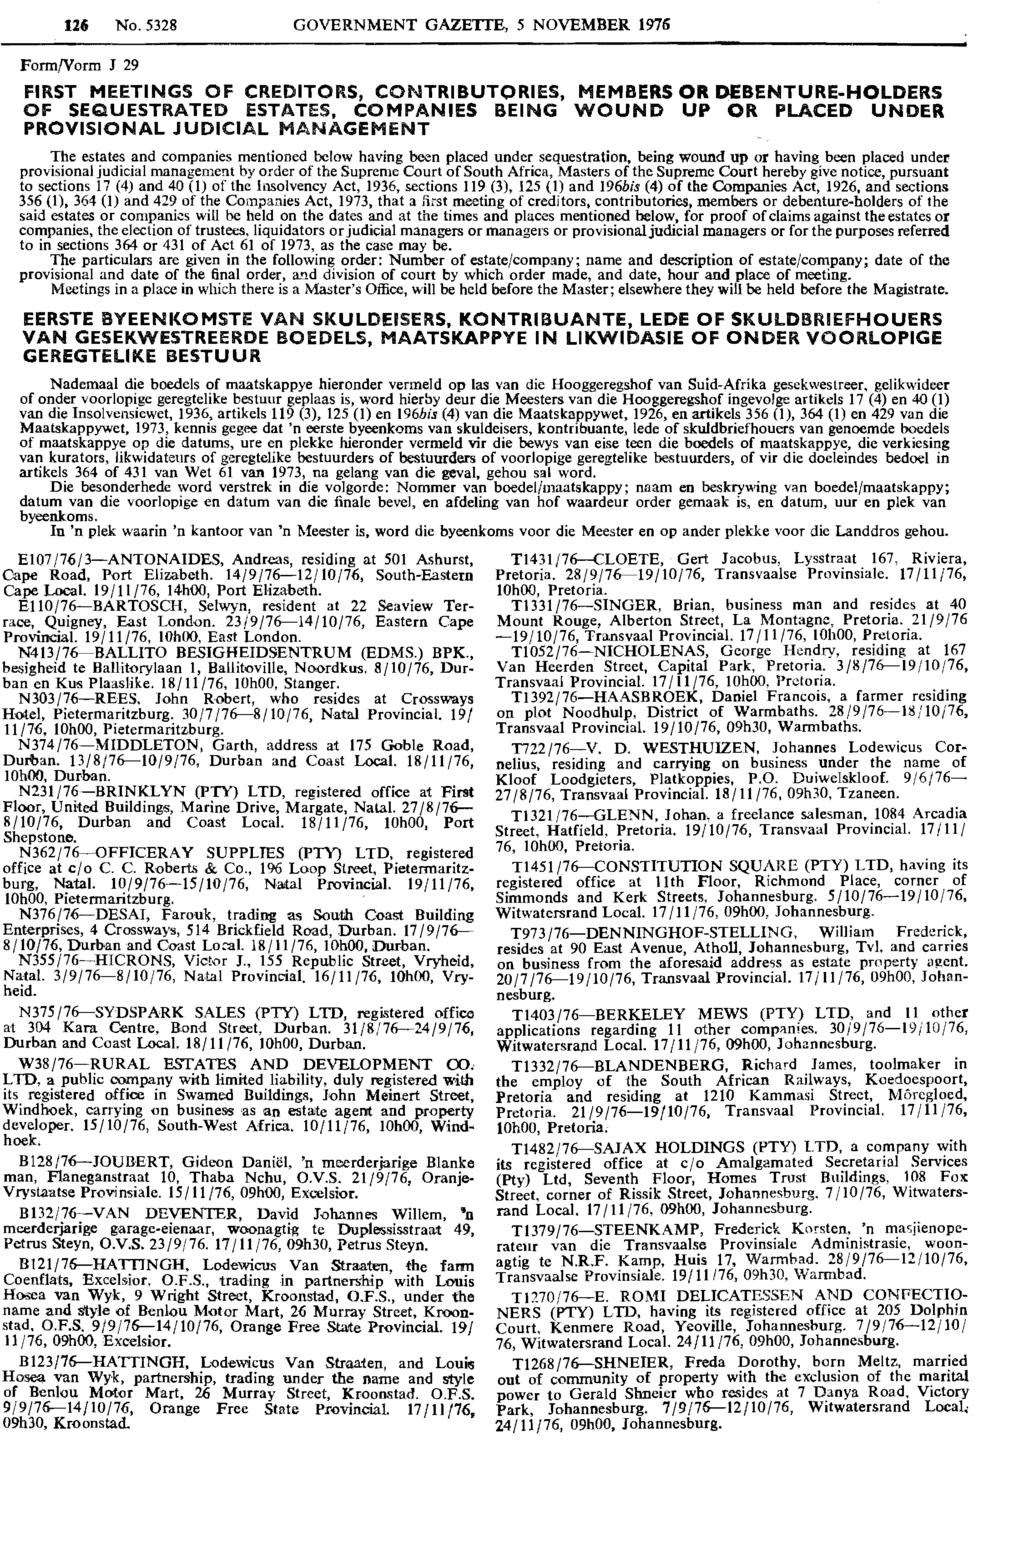 Reproduced by abinet Online in terms of Government Printer s Copyright Authority No. 10505 dated 02 February 1998 126 No. GOVERNMENT GAZETTE, 5 NOVEMBER 1976 FormNorm J 29 FIRT MEETING Of!